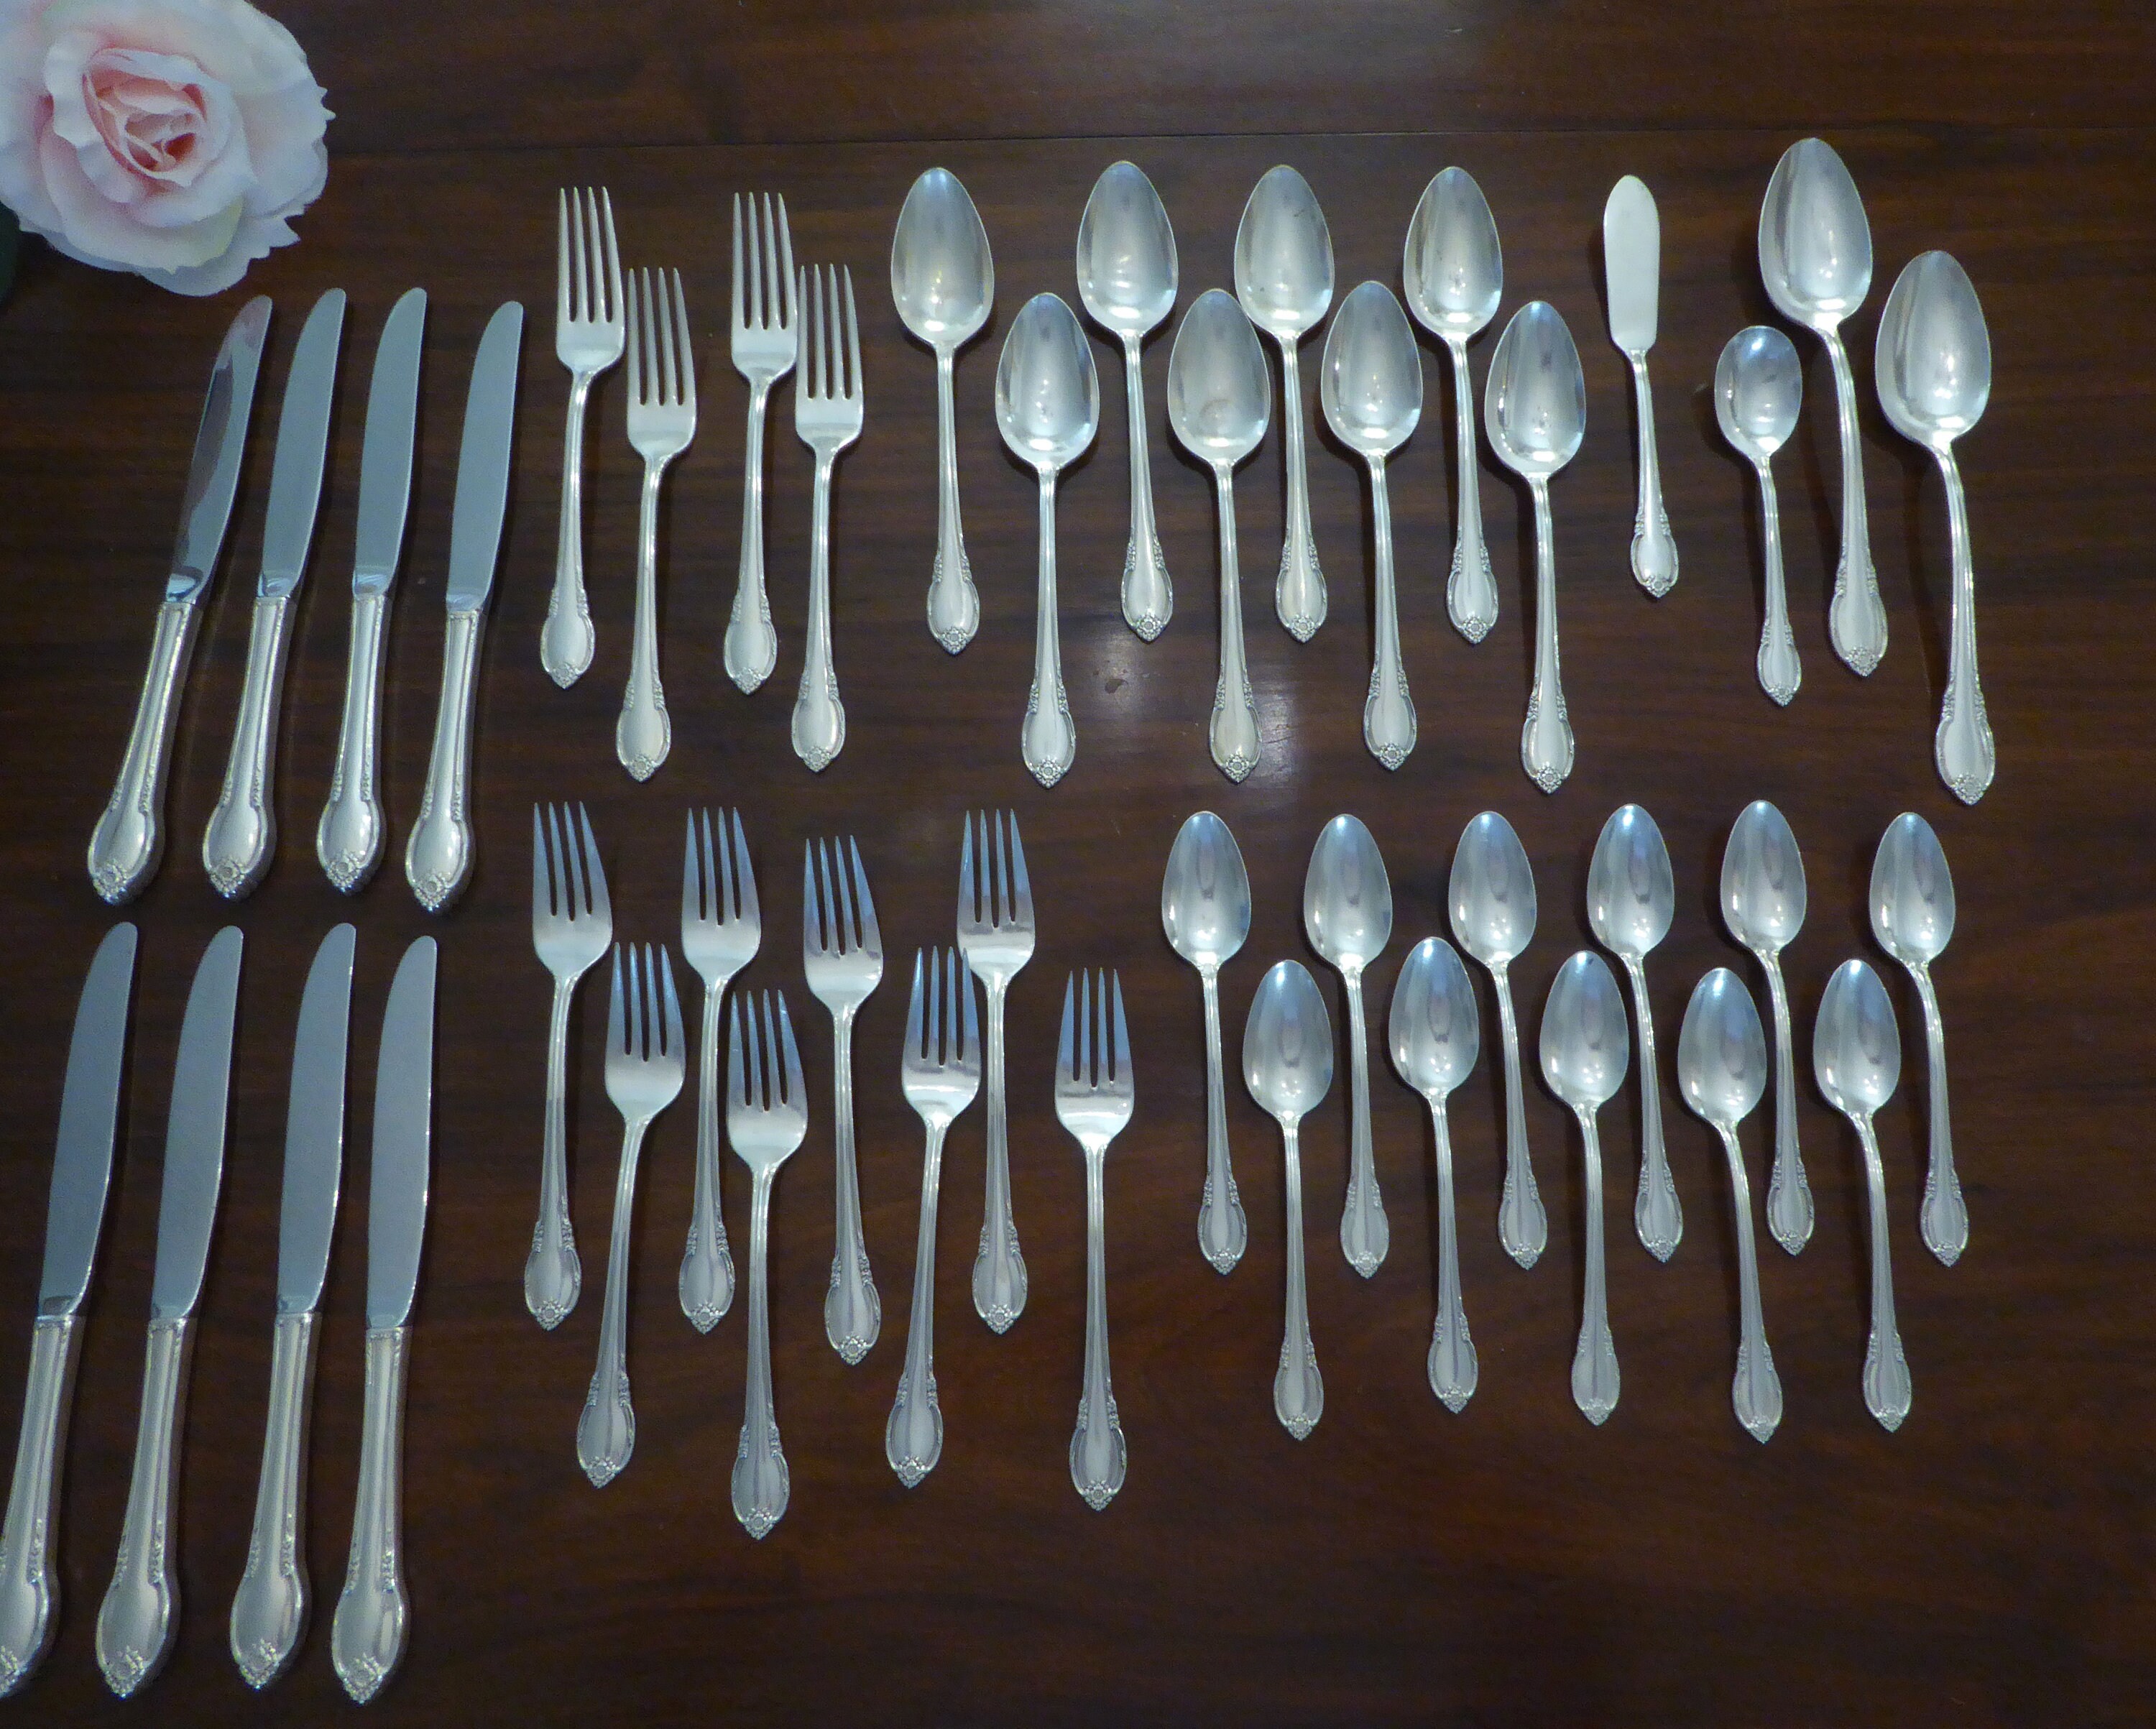 IS Remembrance 6 Dinner Knives 1847 Rogers Vintage Silverplate Flatware Lot B